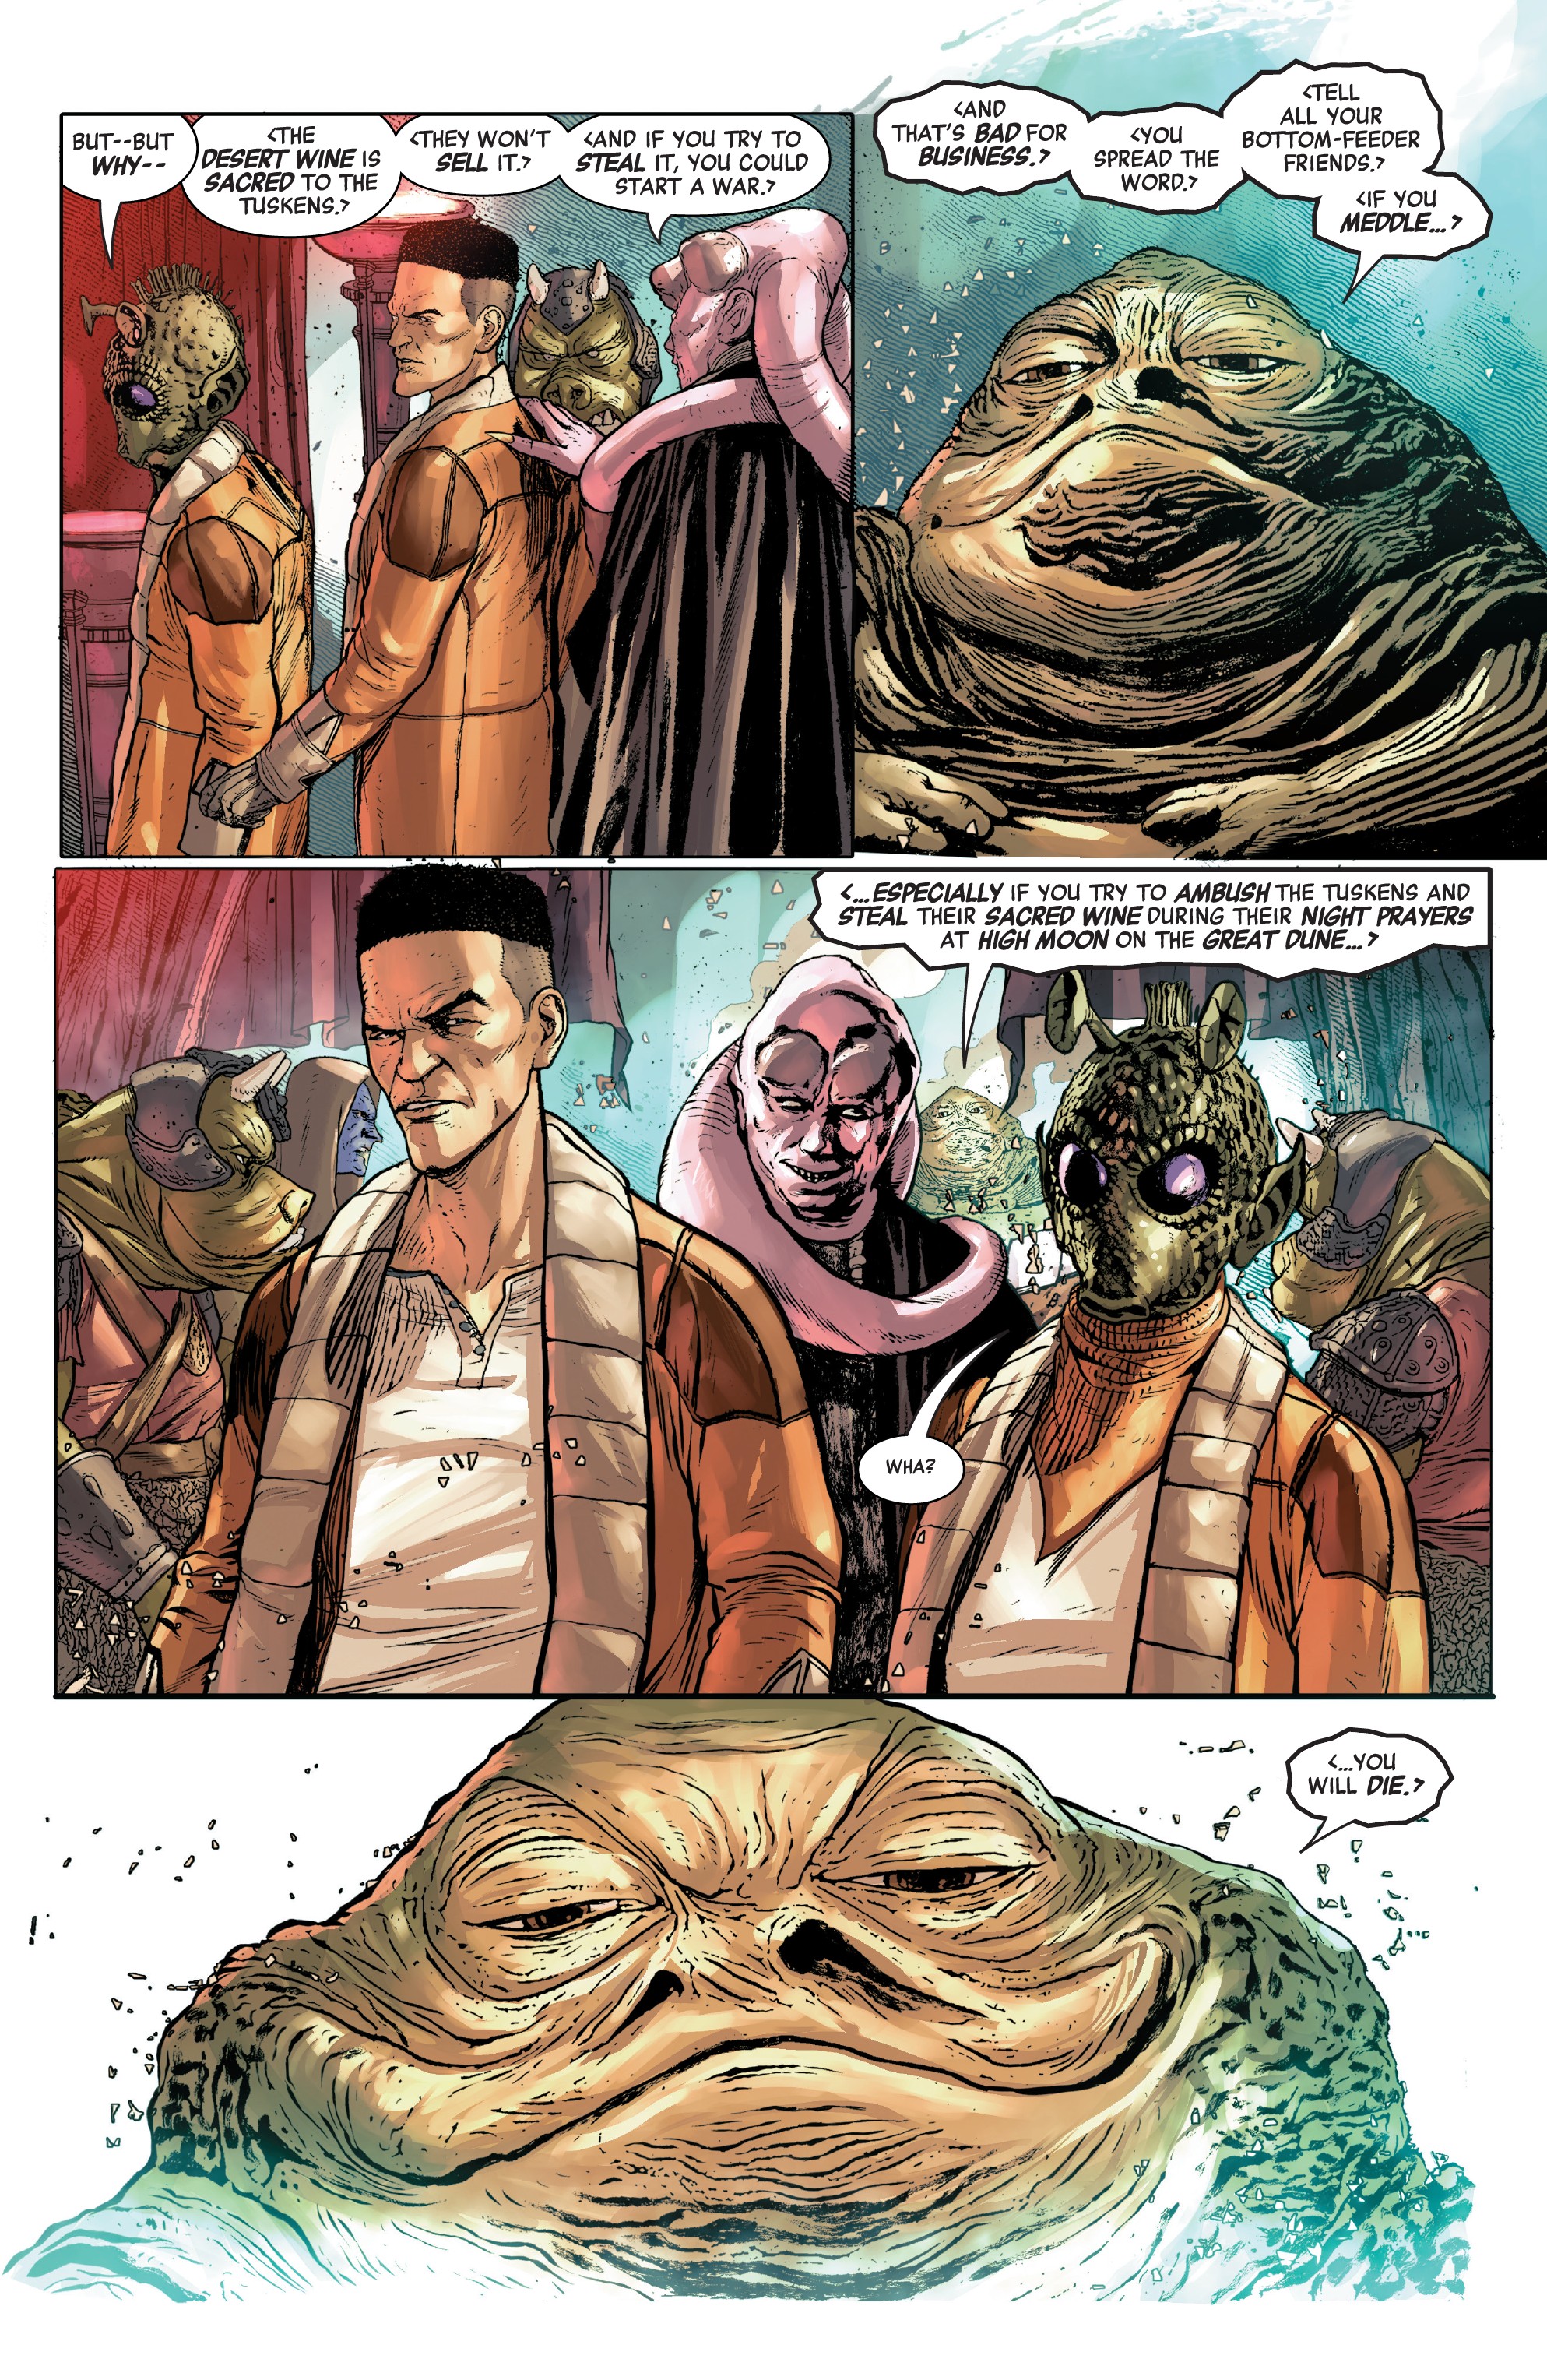 Jabba the Hutt #1 HPA Star Wars: Age of Rebellion 2019